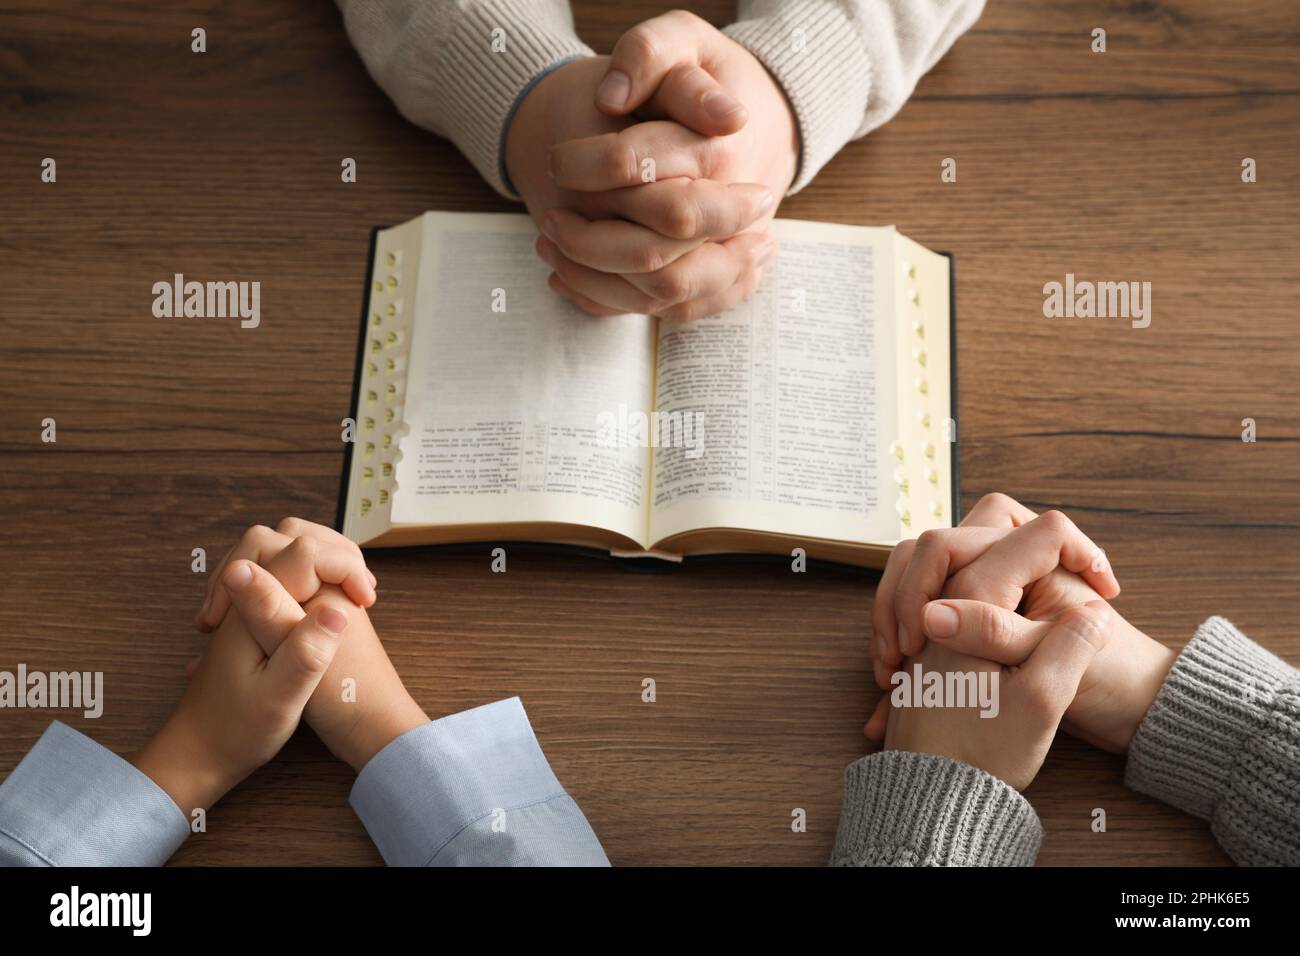 Boy and his godparents praying together at wooden table, closeup Stock Photo